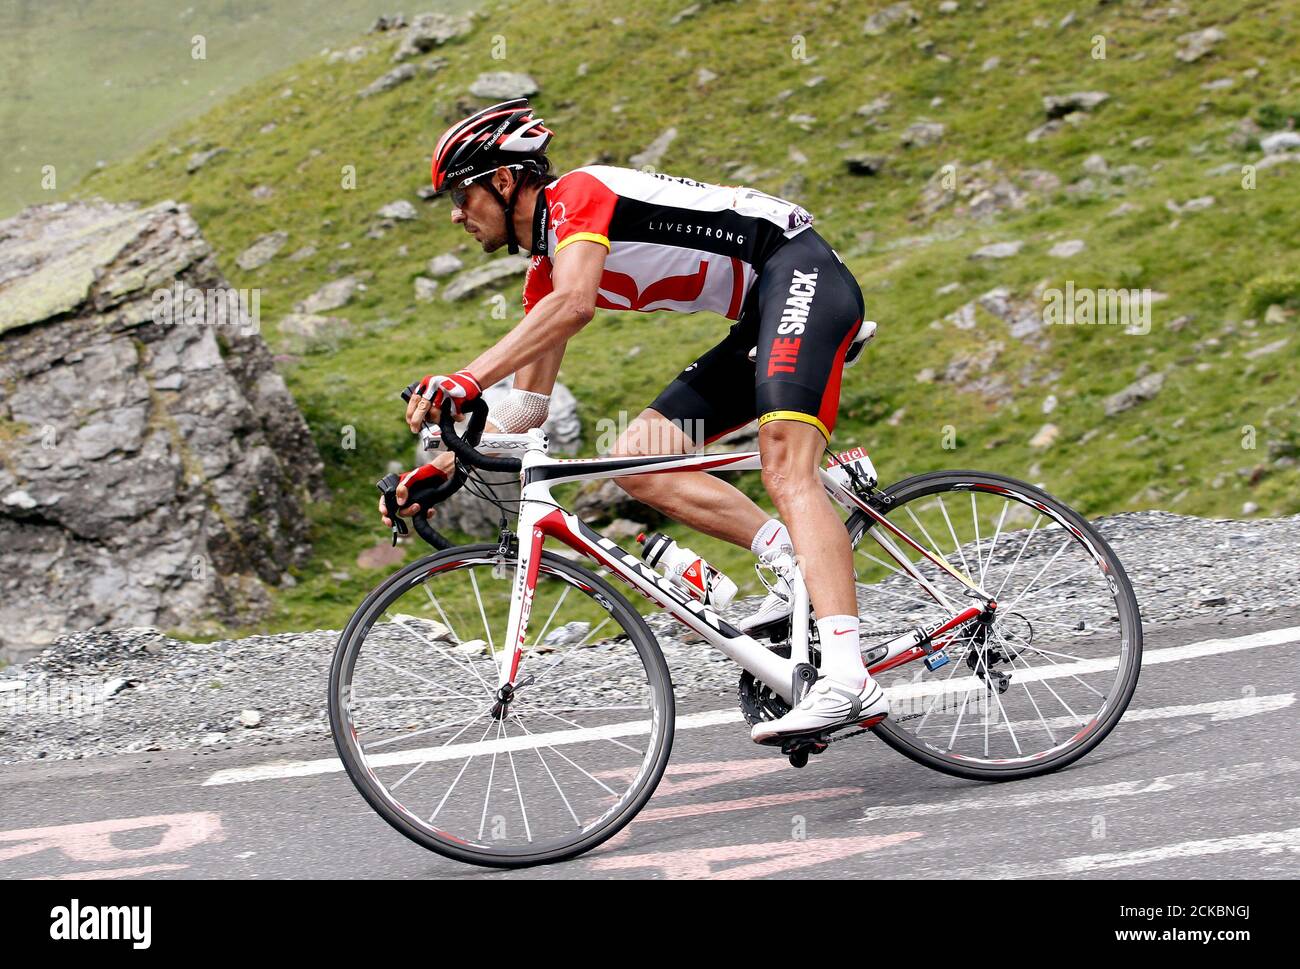 Radioshack rider Andreas Kloden of Germany climbs the mountain during the  12th stage of the Tour de France 2011 cycling race from Cugnaux to  Luz-Ardiden July 14, 2011. Euskaltel-Euskadi team rider Samuel